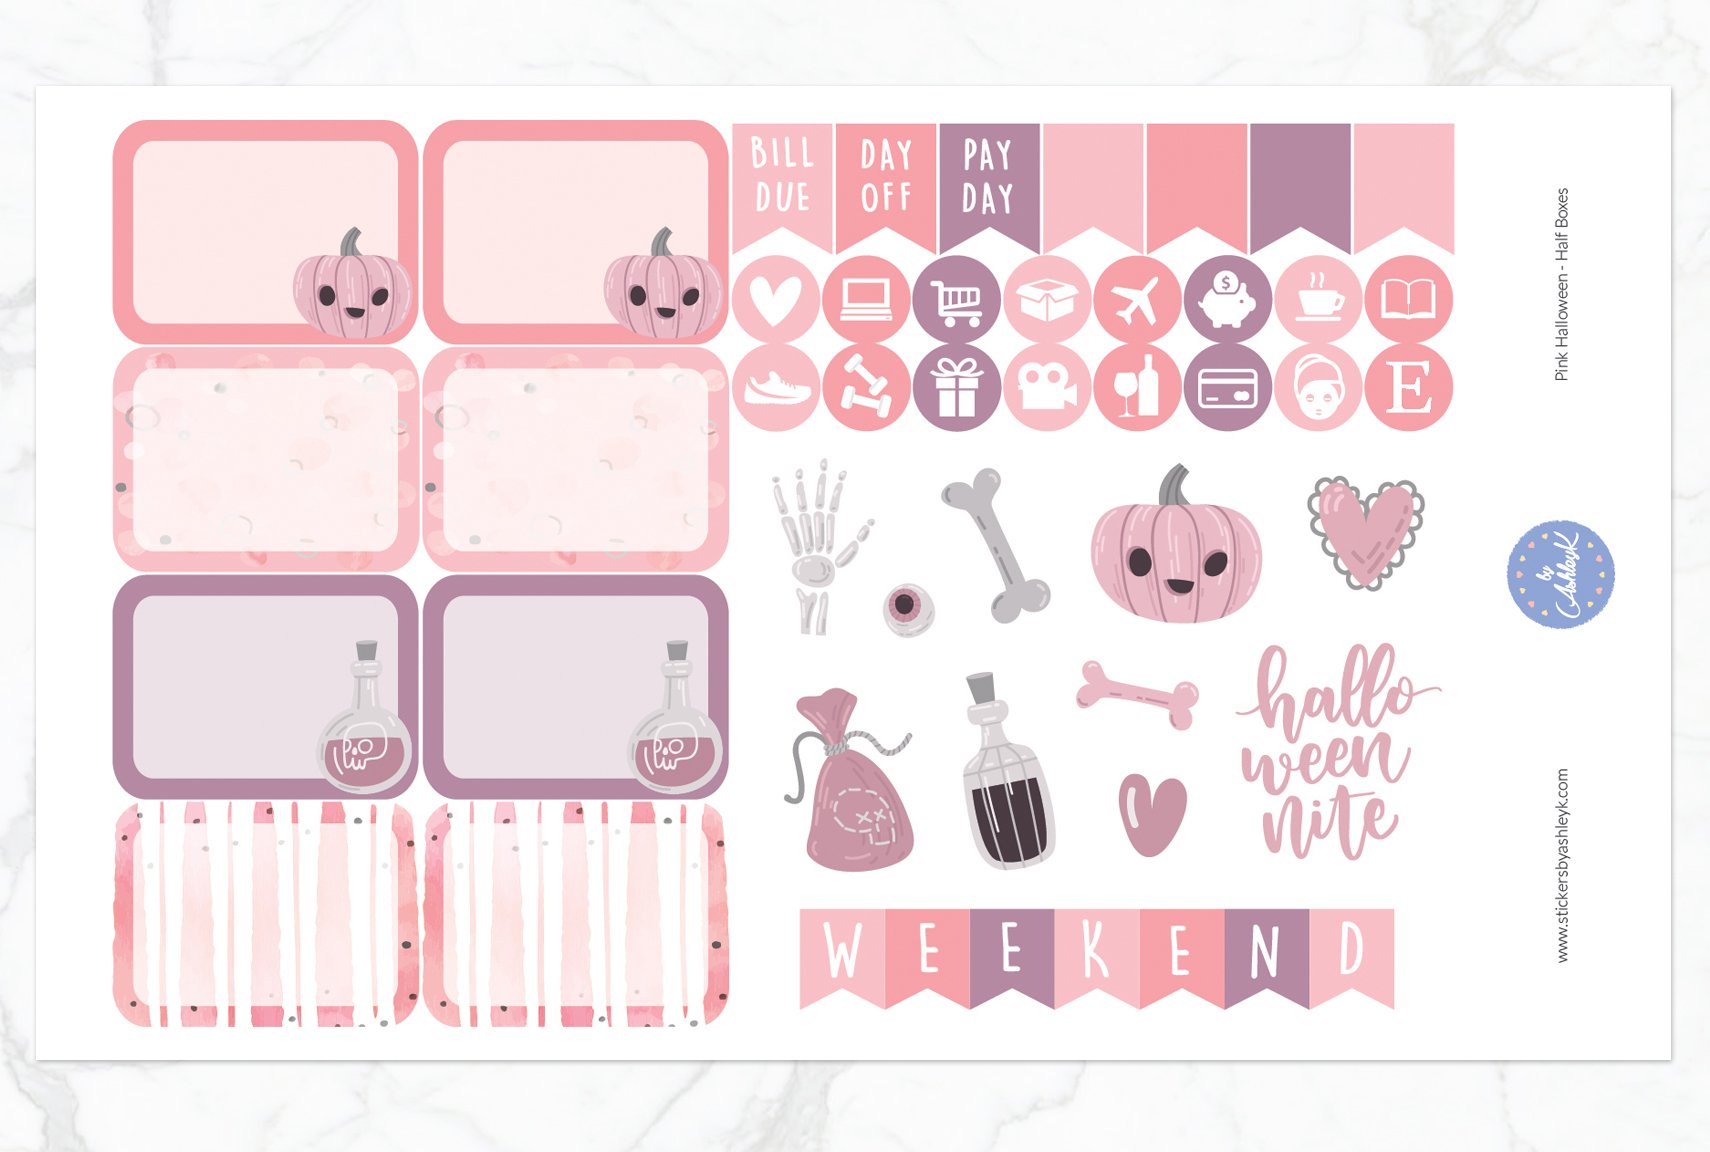 Halloween Printable Planner Sticker Kit Graphic by Stickers By Jennifer ·  Creative Fabrica